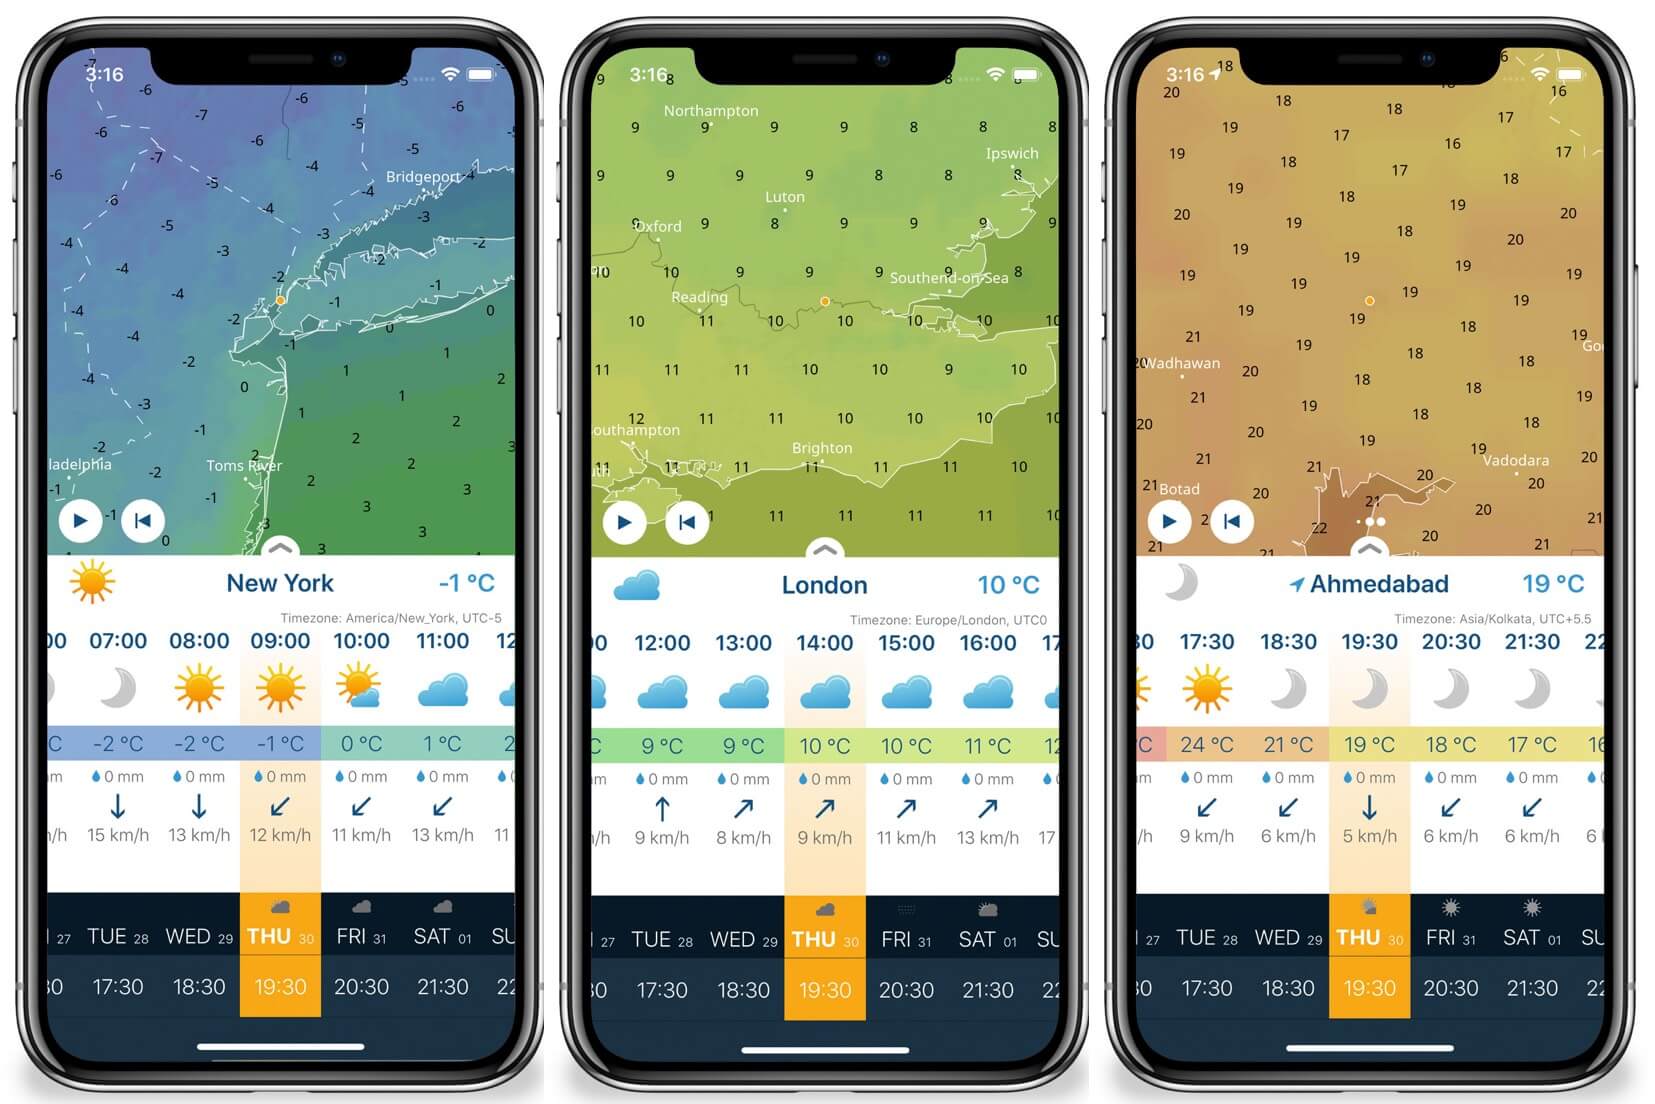 Search Multiple Cities Weather on Ventusky iPhone App